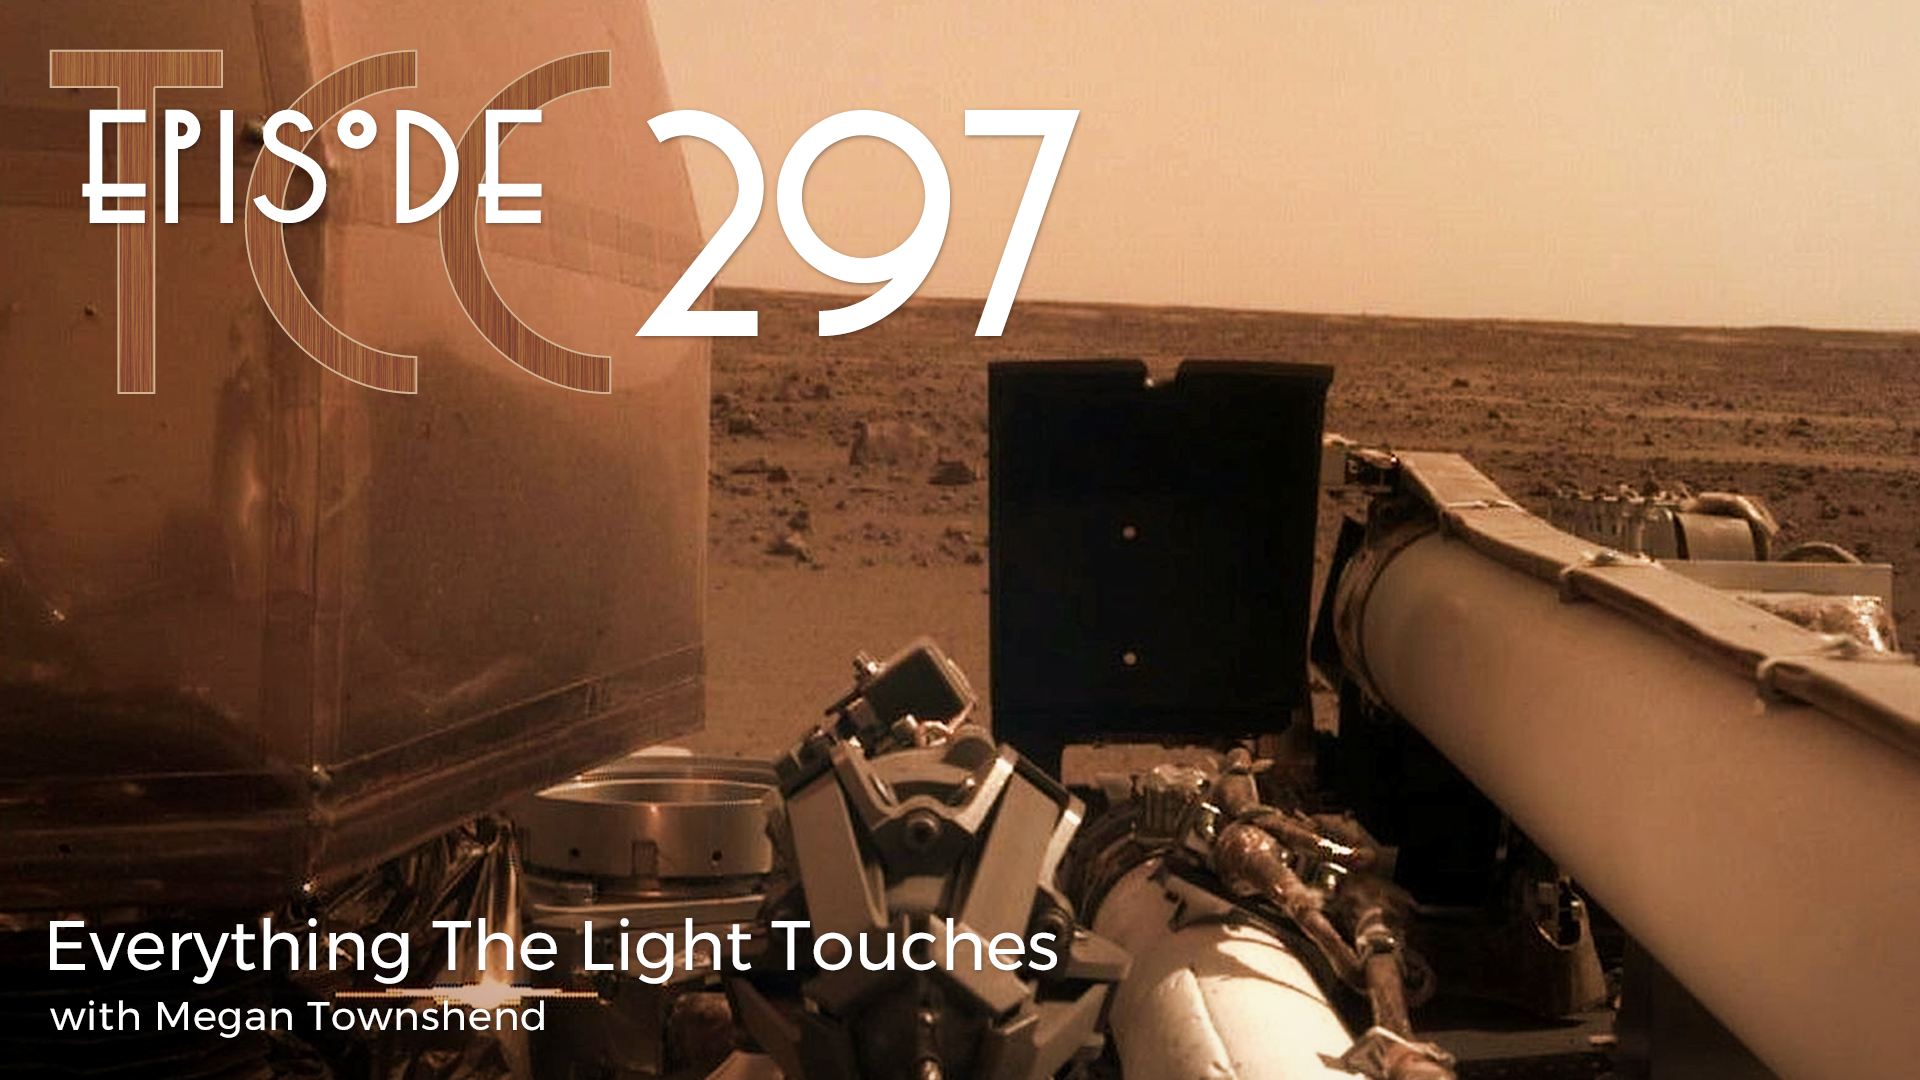 The Citadel Cafe 297: Everything The Light Touches